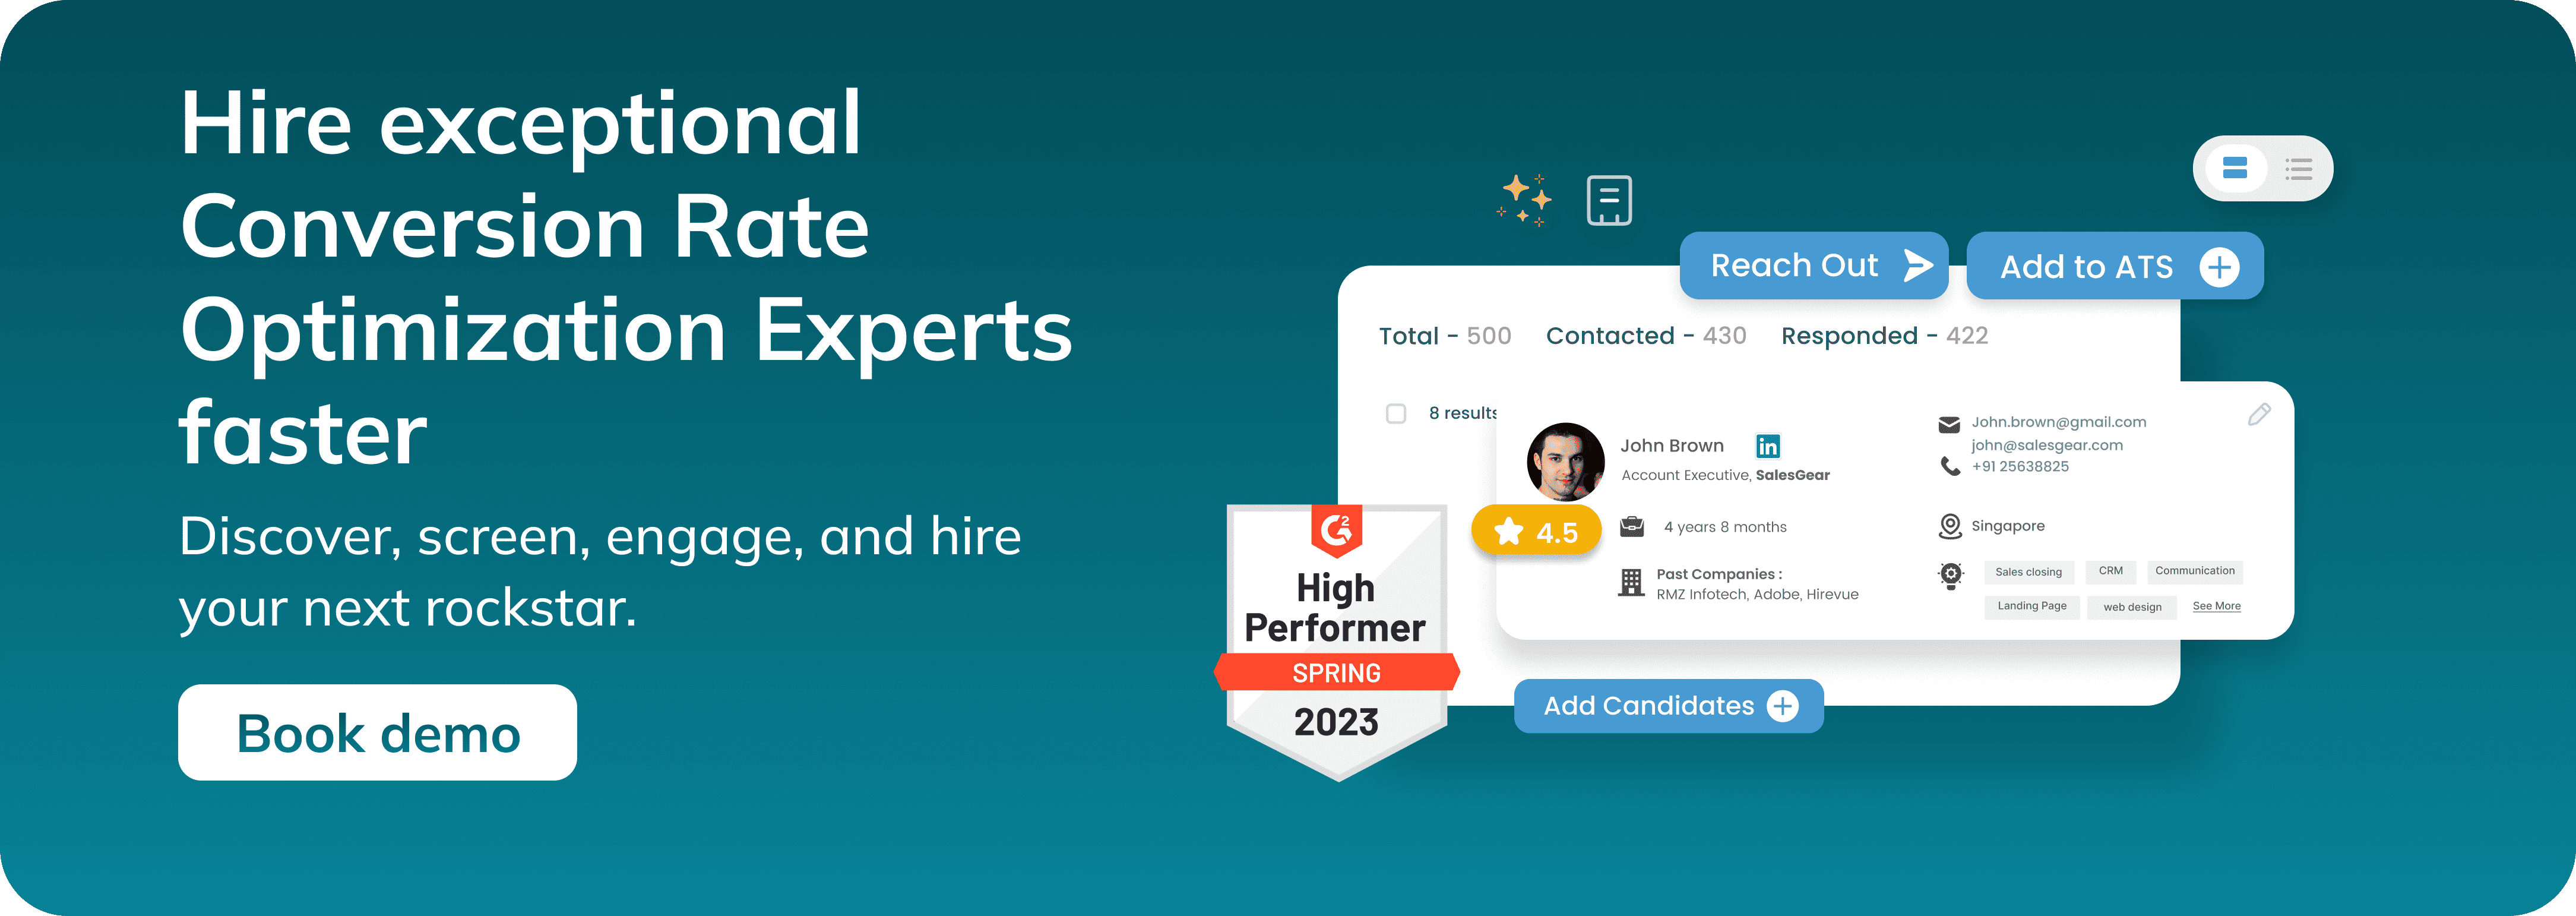 How to hire the perfect Conversion rate optimization experts.png